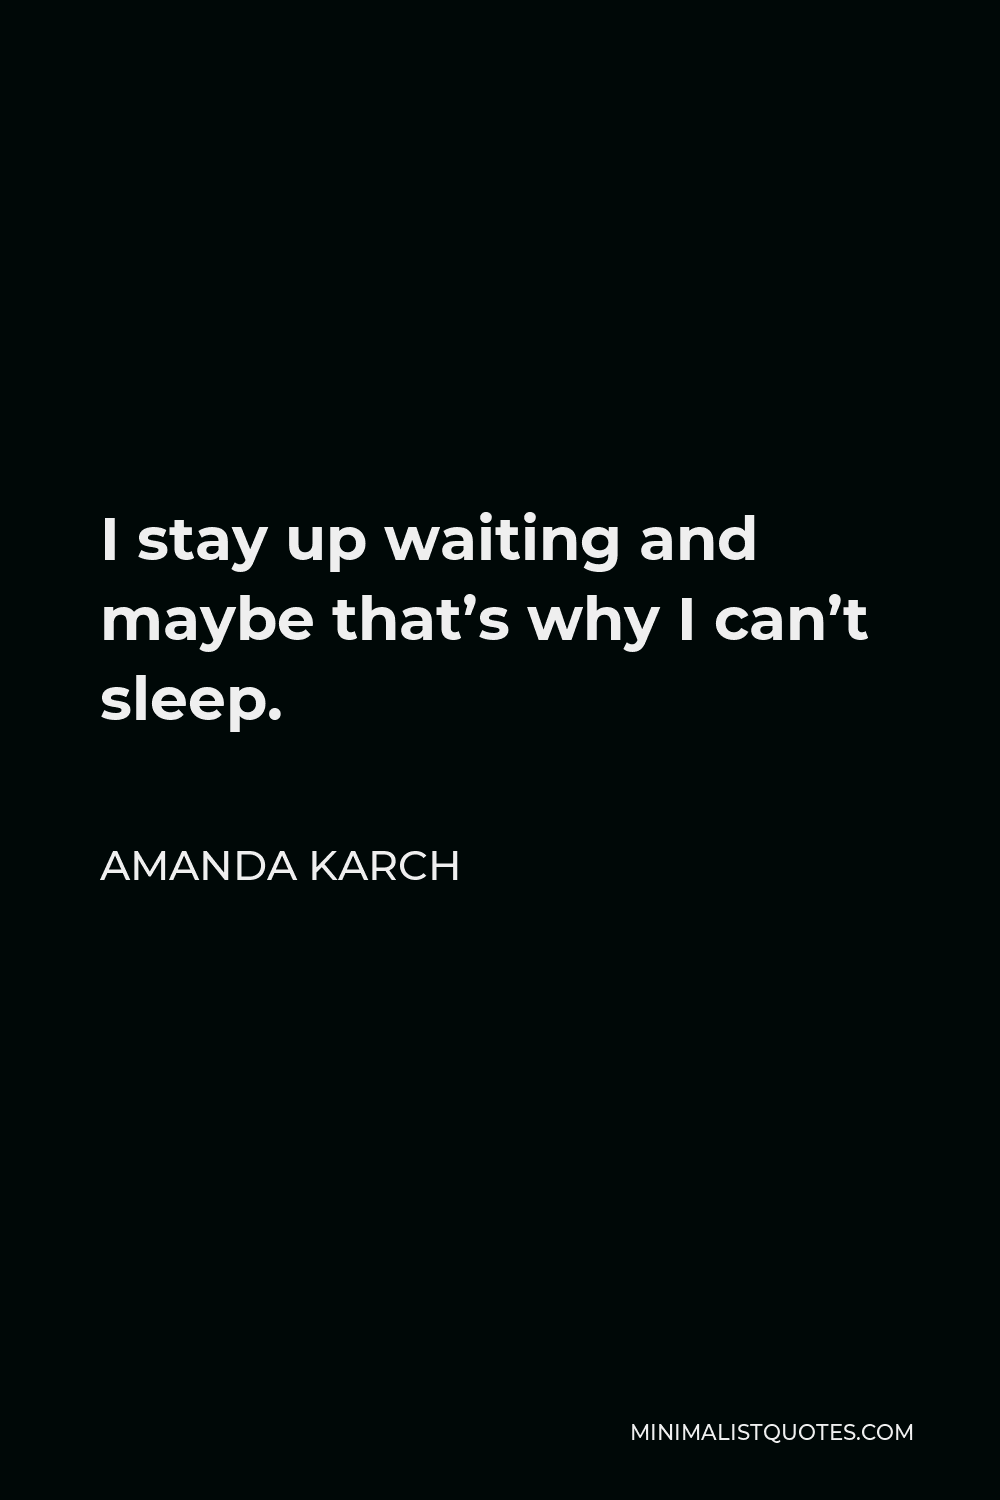 Amanda Karch Quote - I stay up waiting and maybe that’s why I can’t sleep.